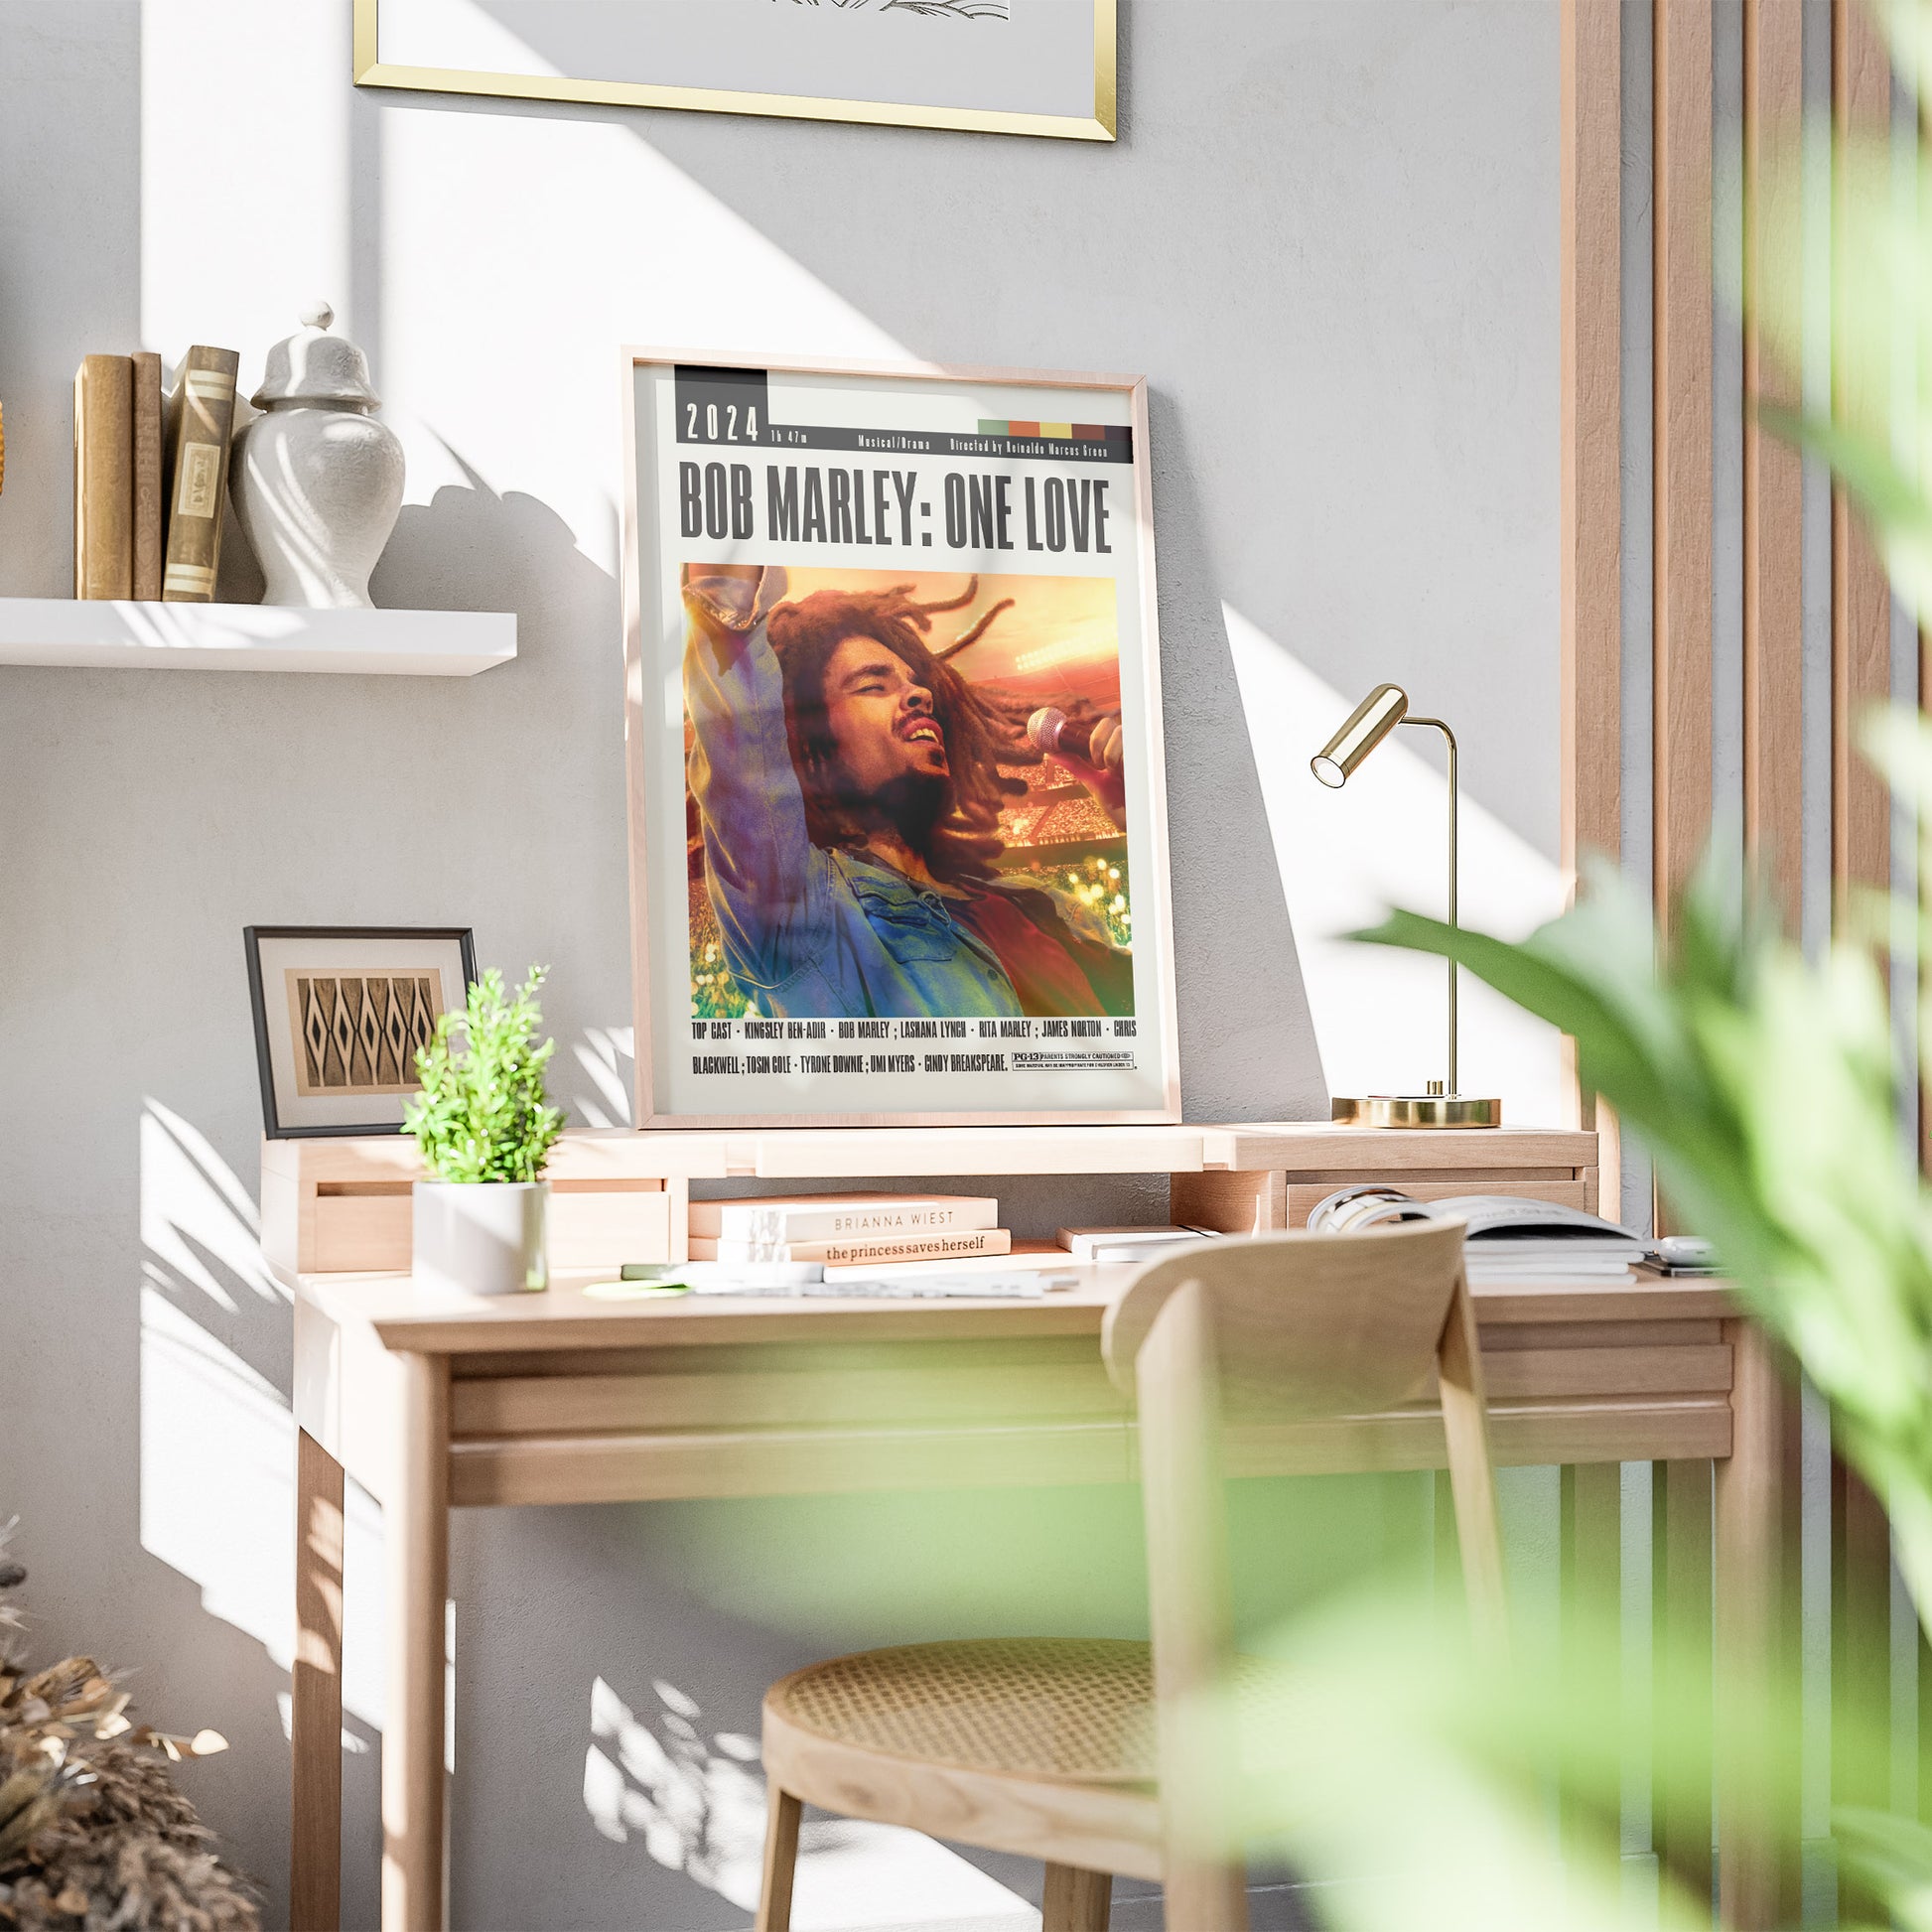 Discover the iconic Bob Marley One Love Movie Posters, featuring vivid designs and striking imagery. These posters are perfect for fans of Bob Marley and make for a great addition to any room. Made with high-quality materials, these posters are a must-have for any music lover or poster collector.